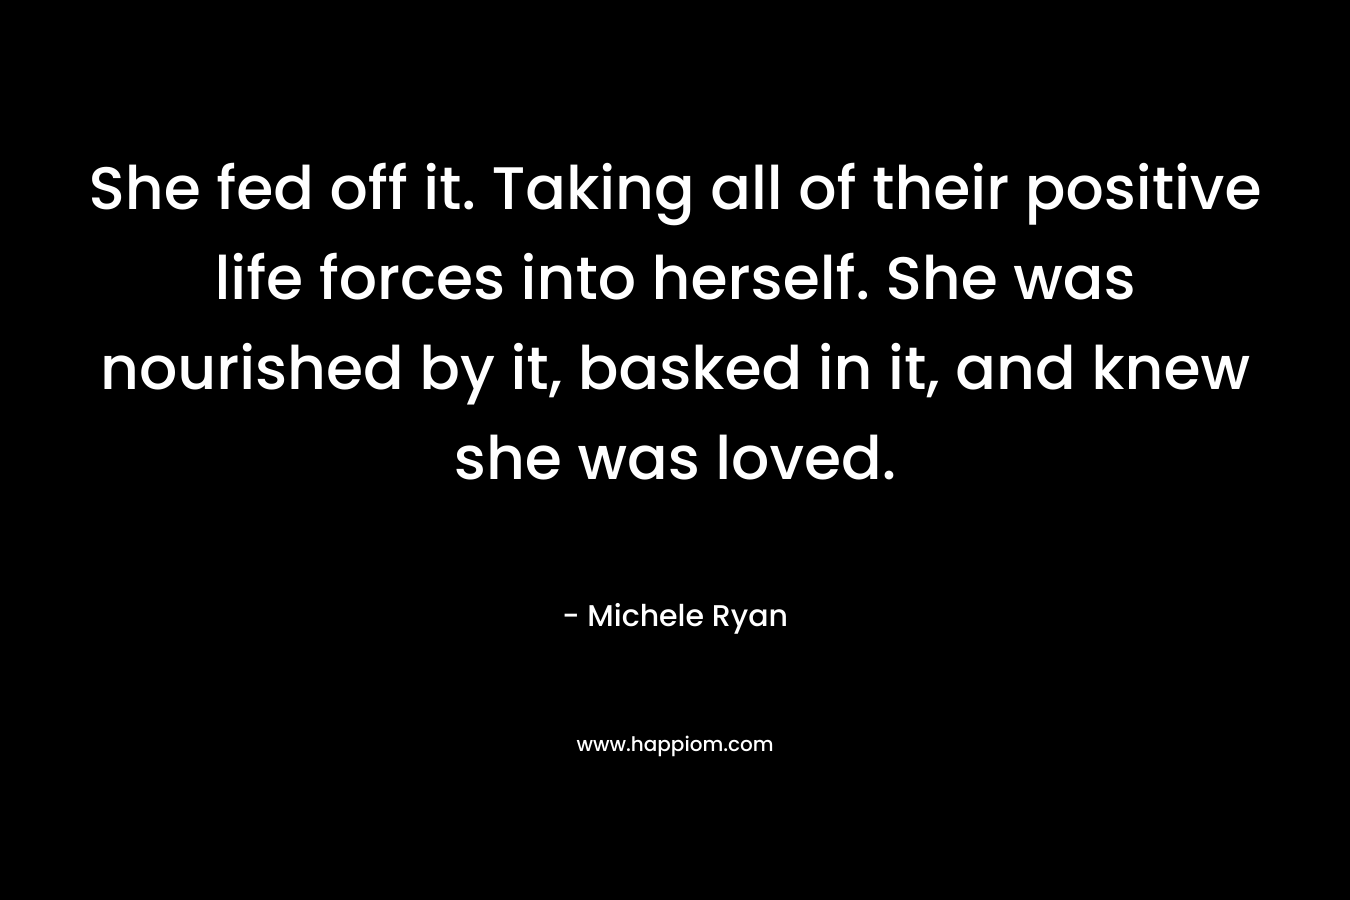 She fed off it. Taking all of their positive life forces into herself. She was nourished by it, basked in it, and knew she was loved. – Michele Ryan